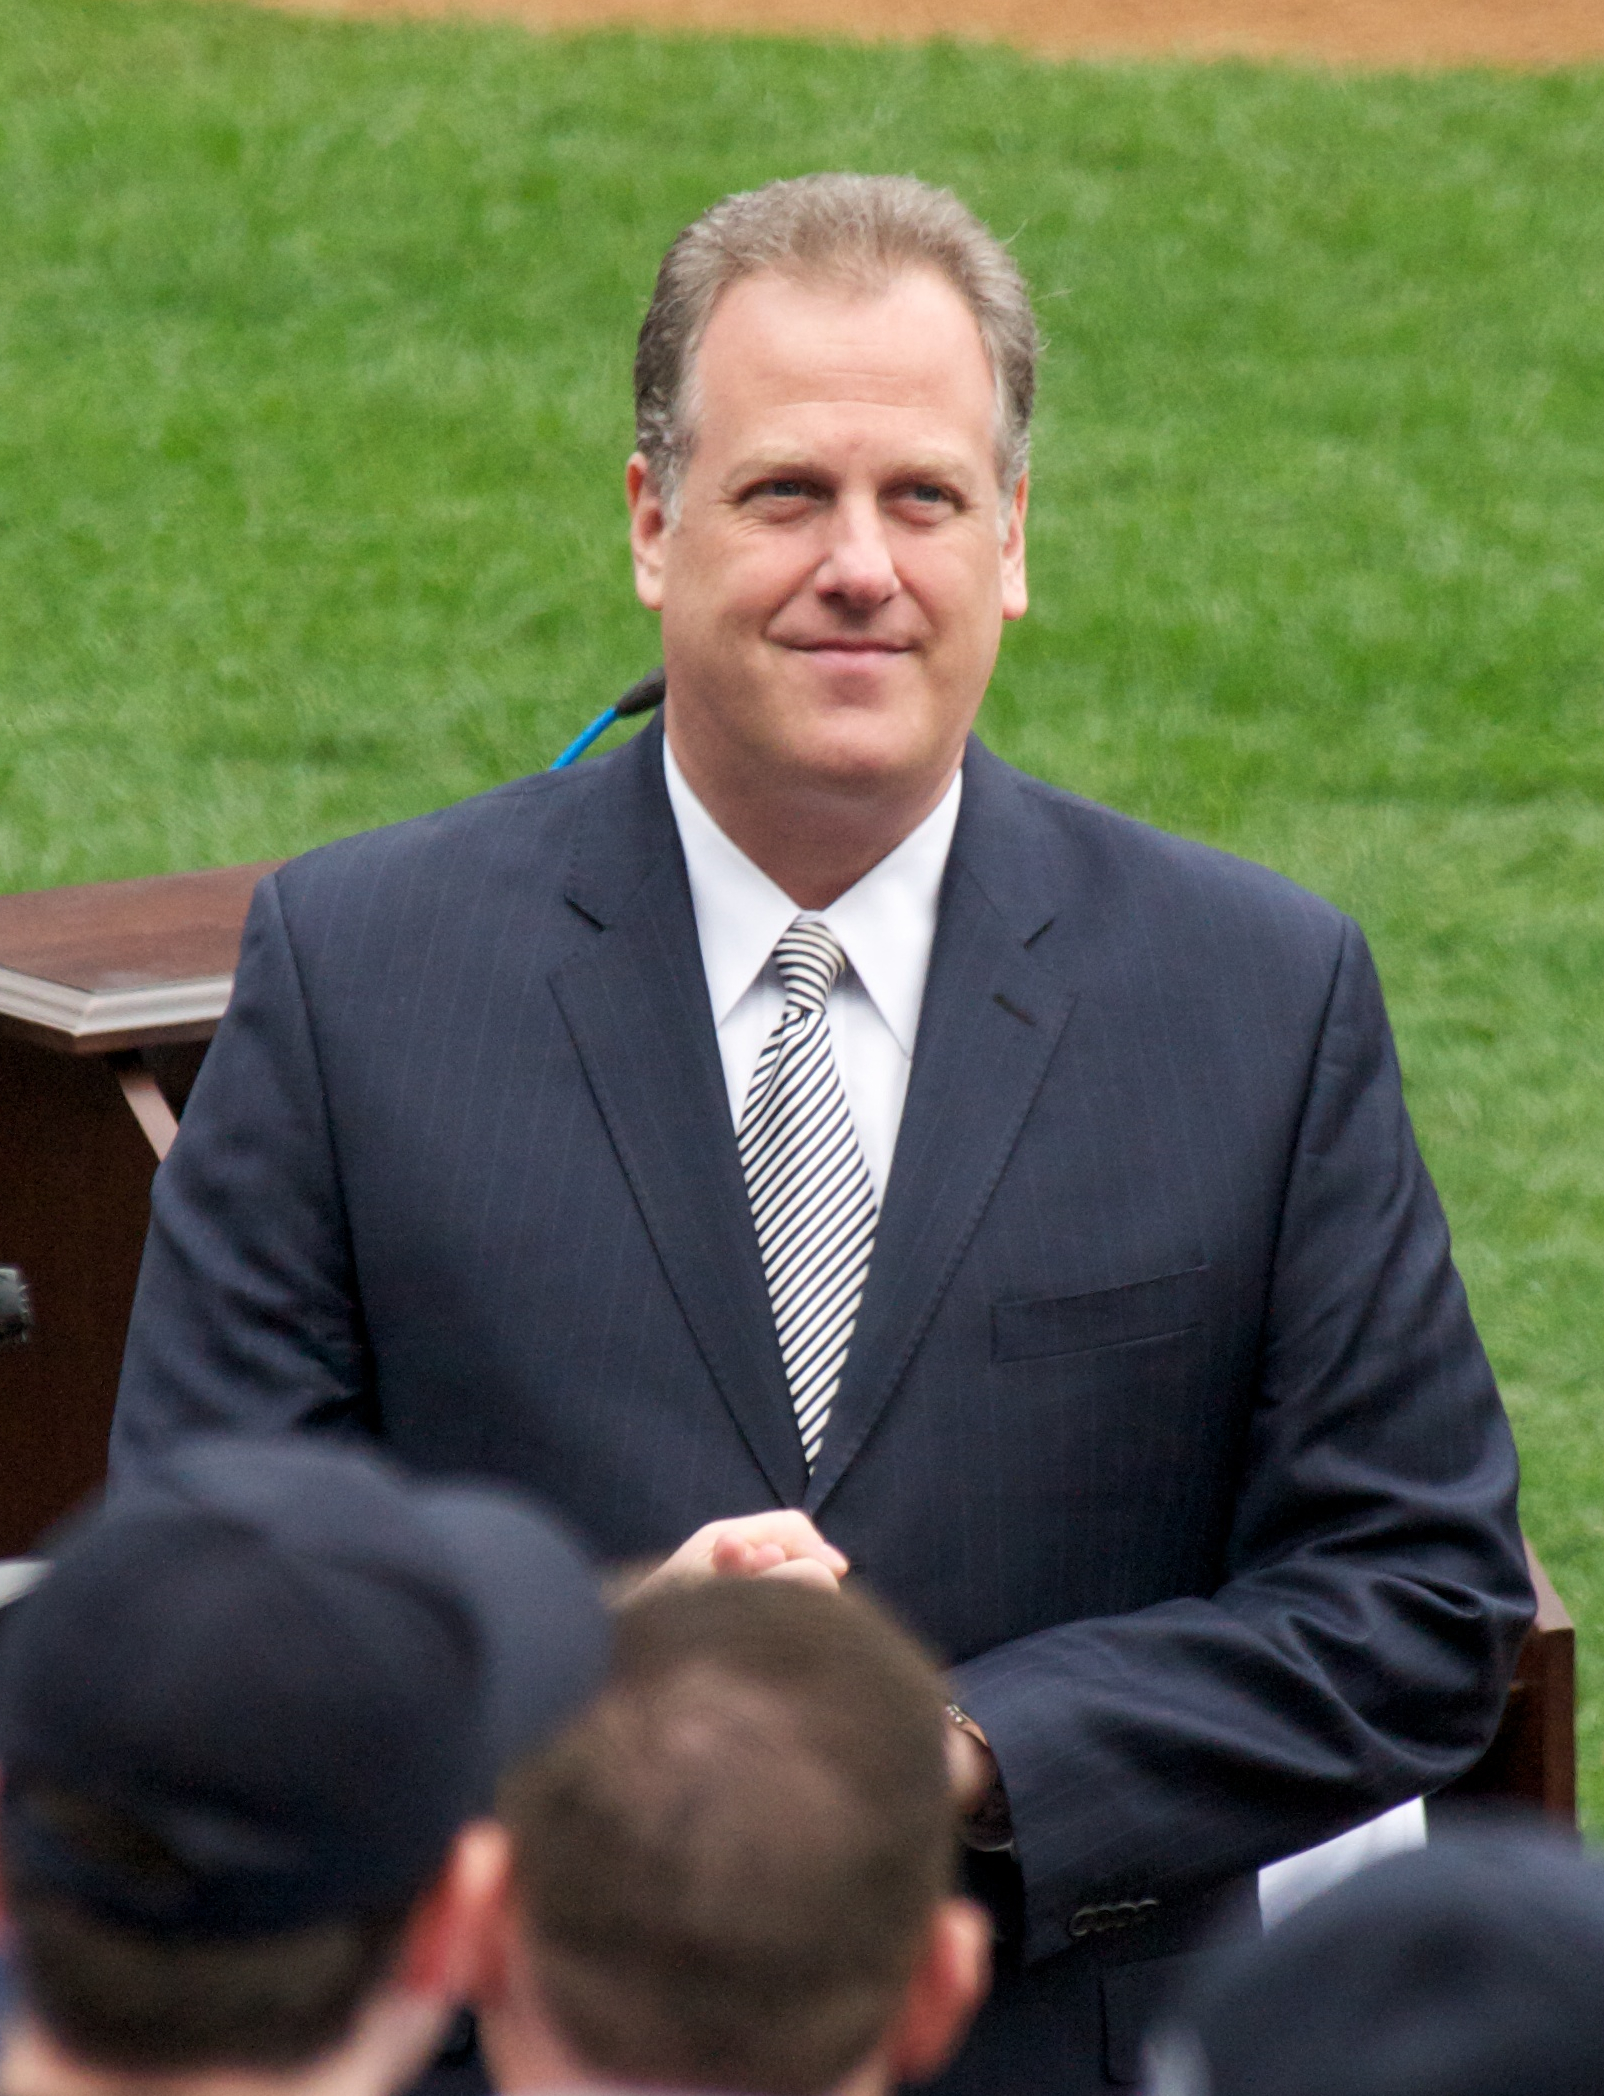 “Voice of the Yankees” Michael Kay to Receive Vin Scully Award for Excellence in Sports Broadcasting from WFUV Radio